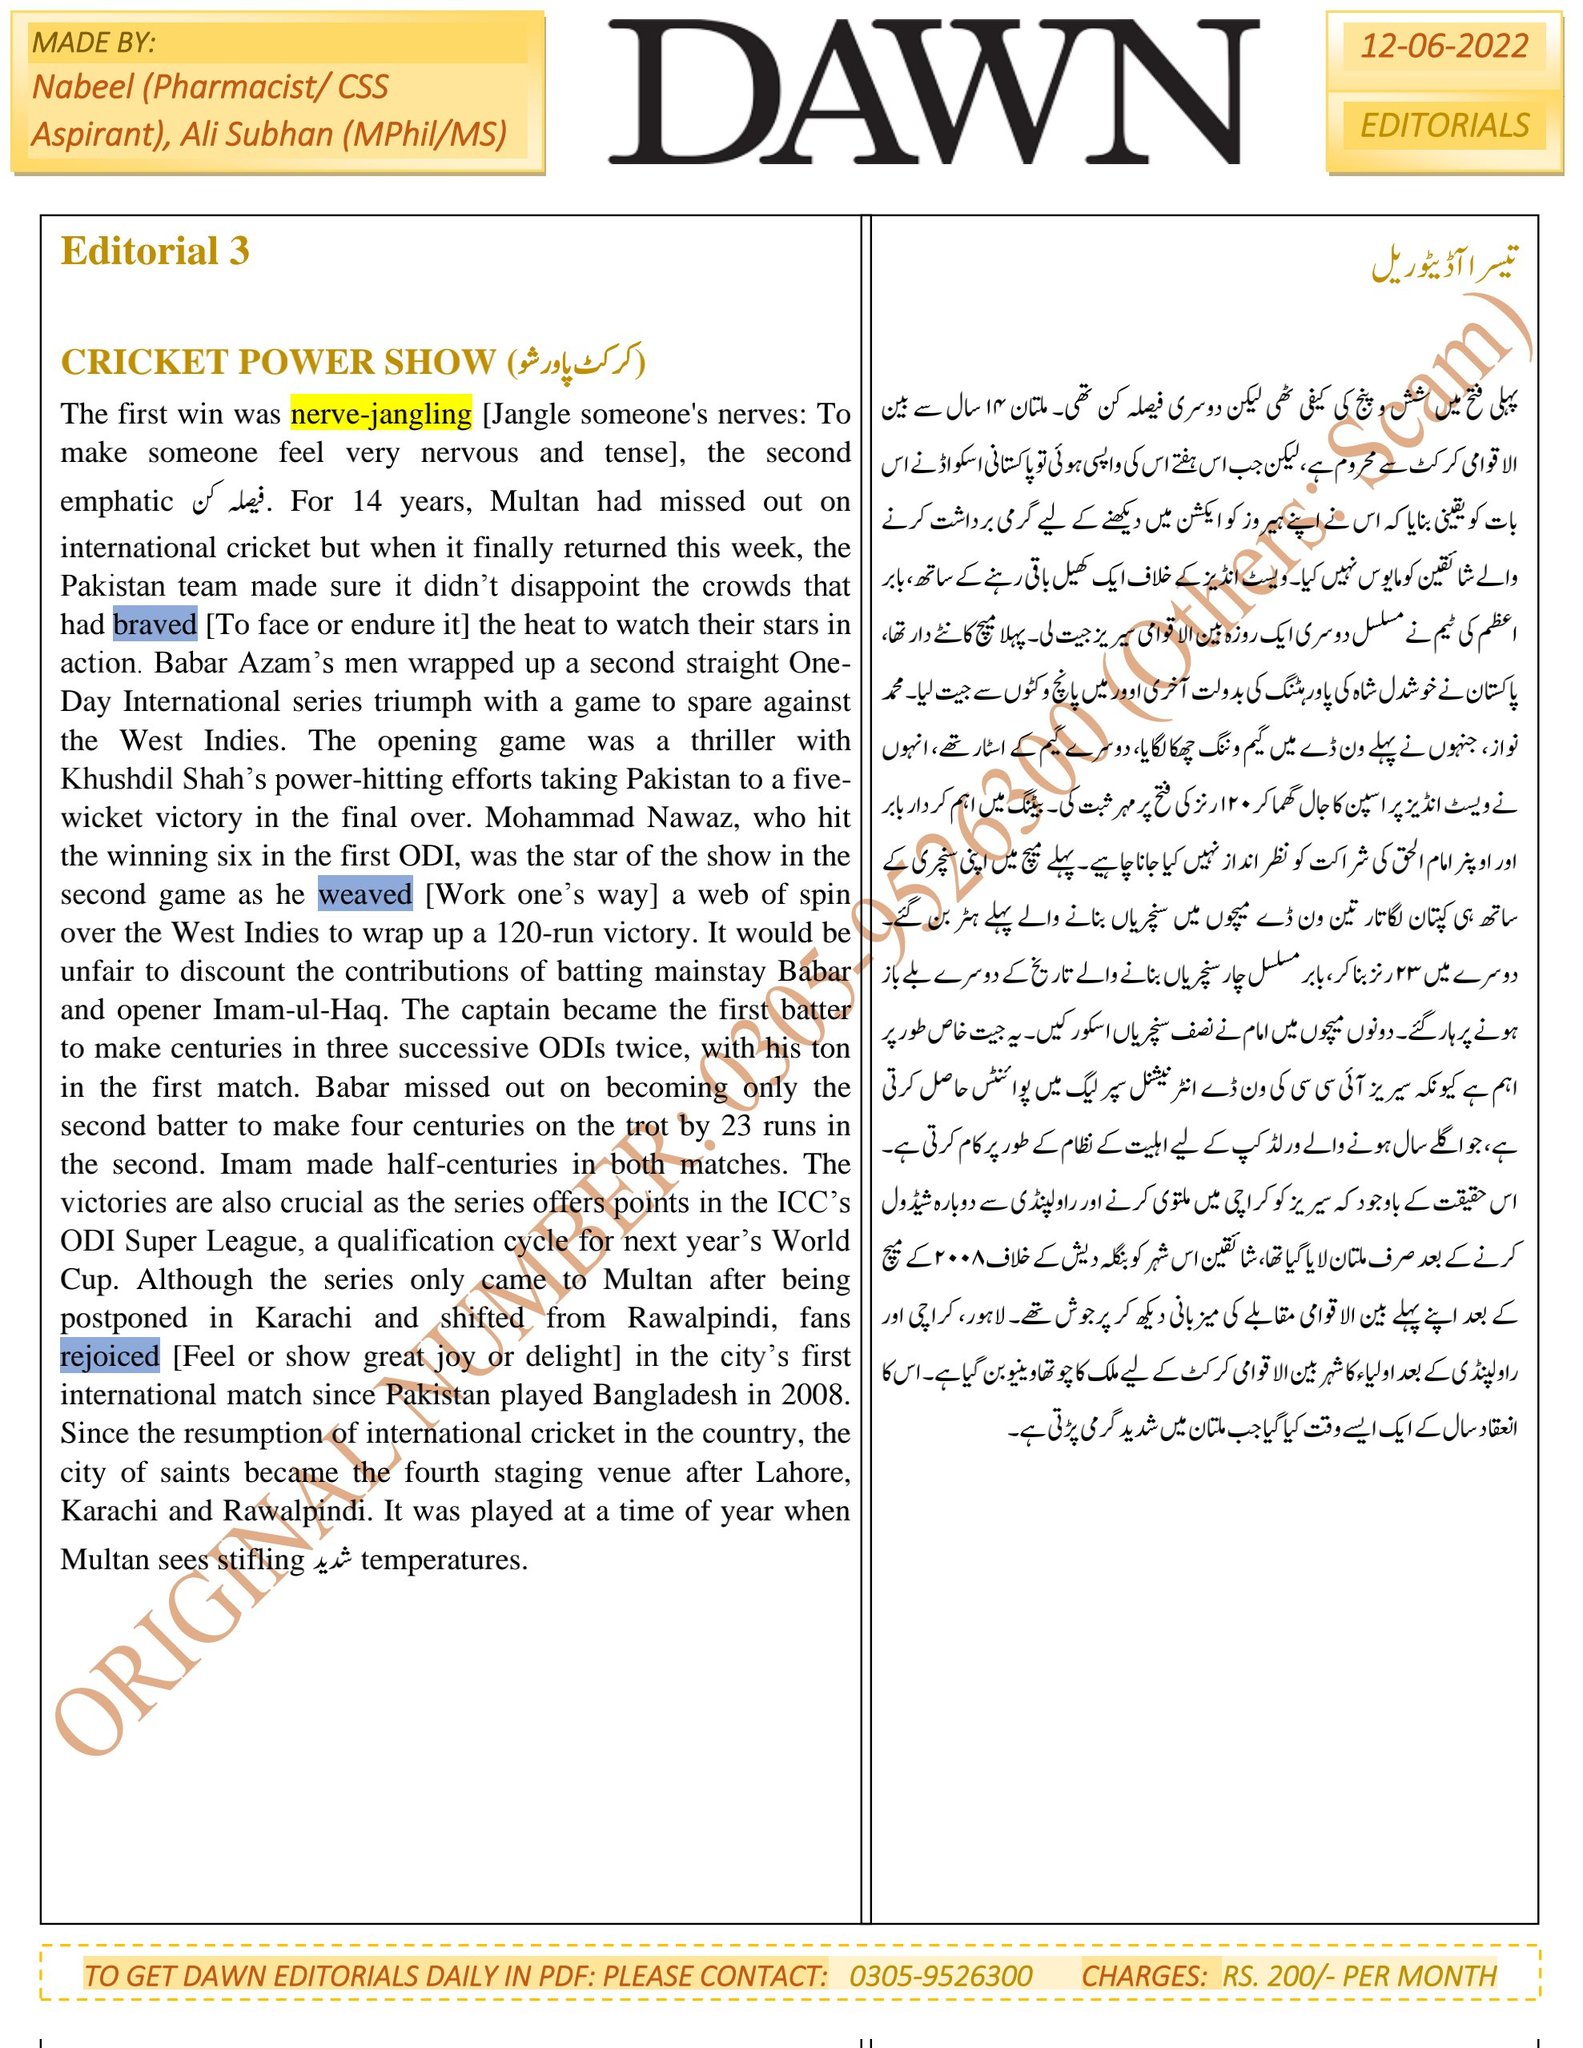 Daily DAWN News Vocabulary with Urdu Meaning (14 September 2020)